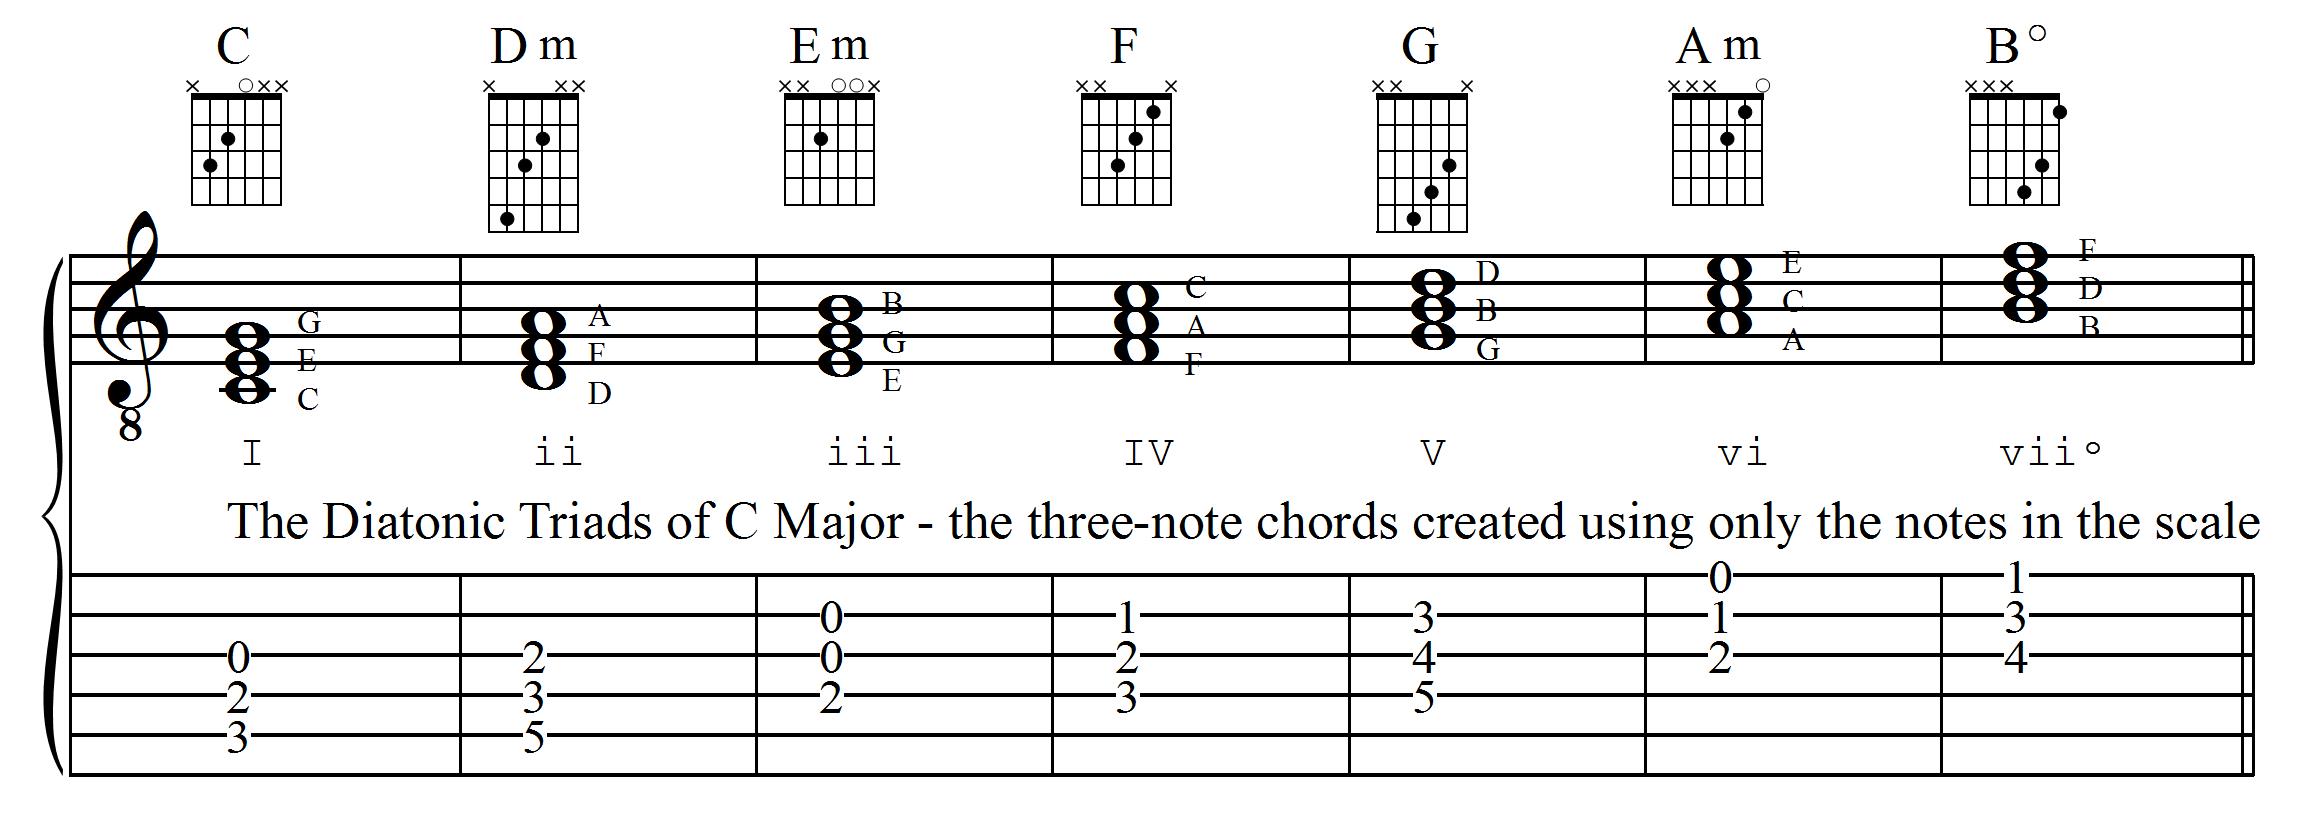 The Diatonic Triads in the C Major Scale